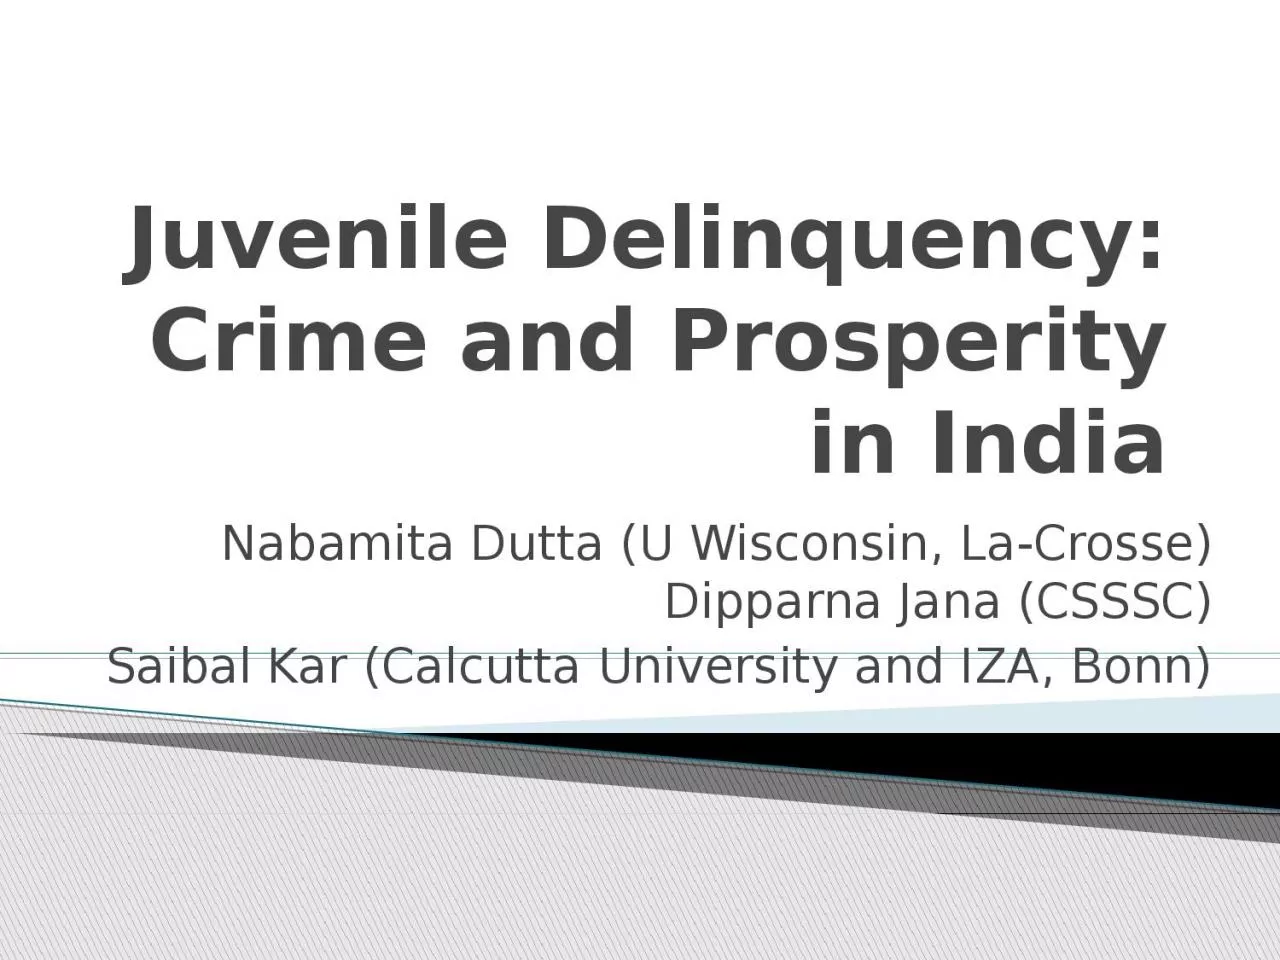 Juvenile Delinquency: Crime and Prosperity in India